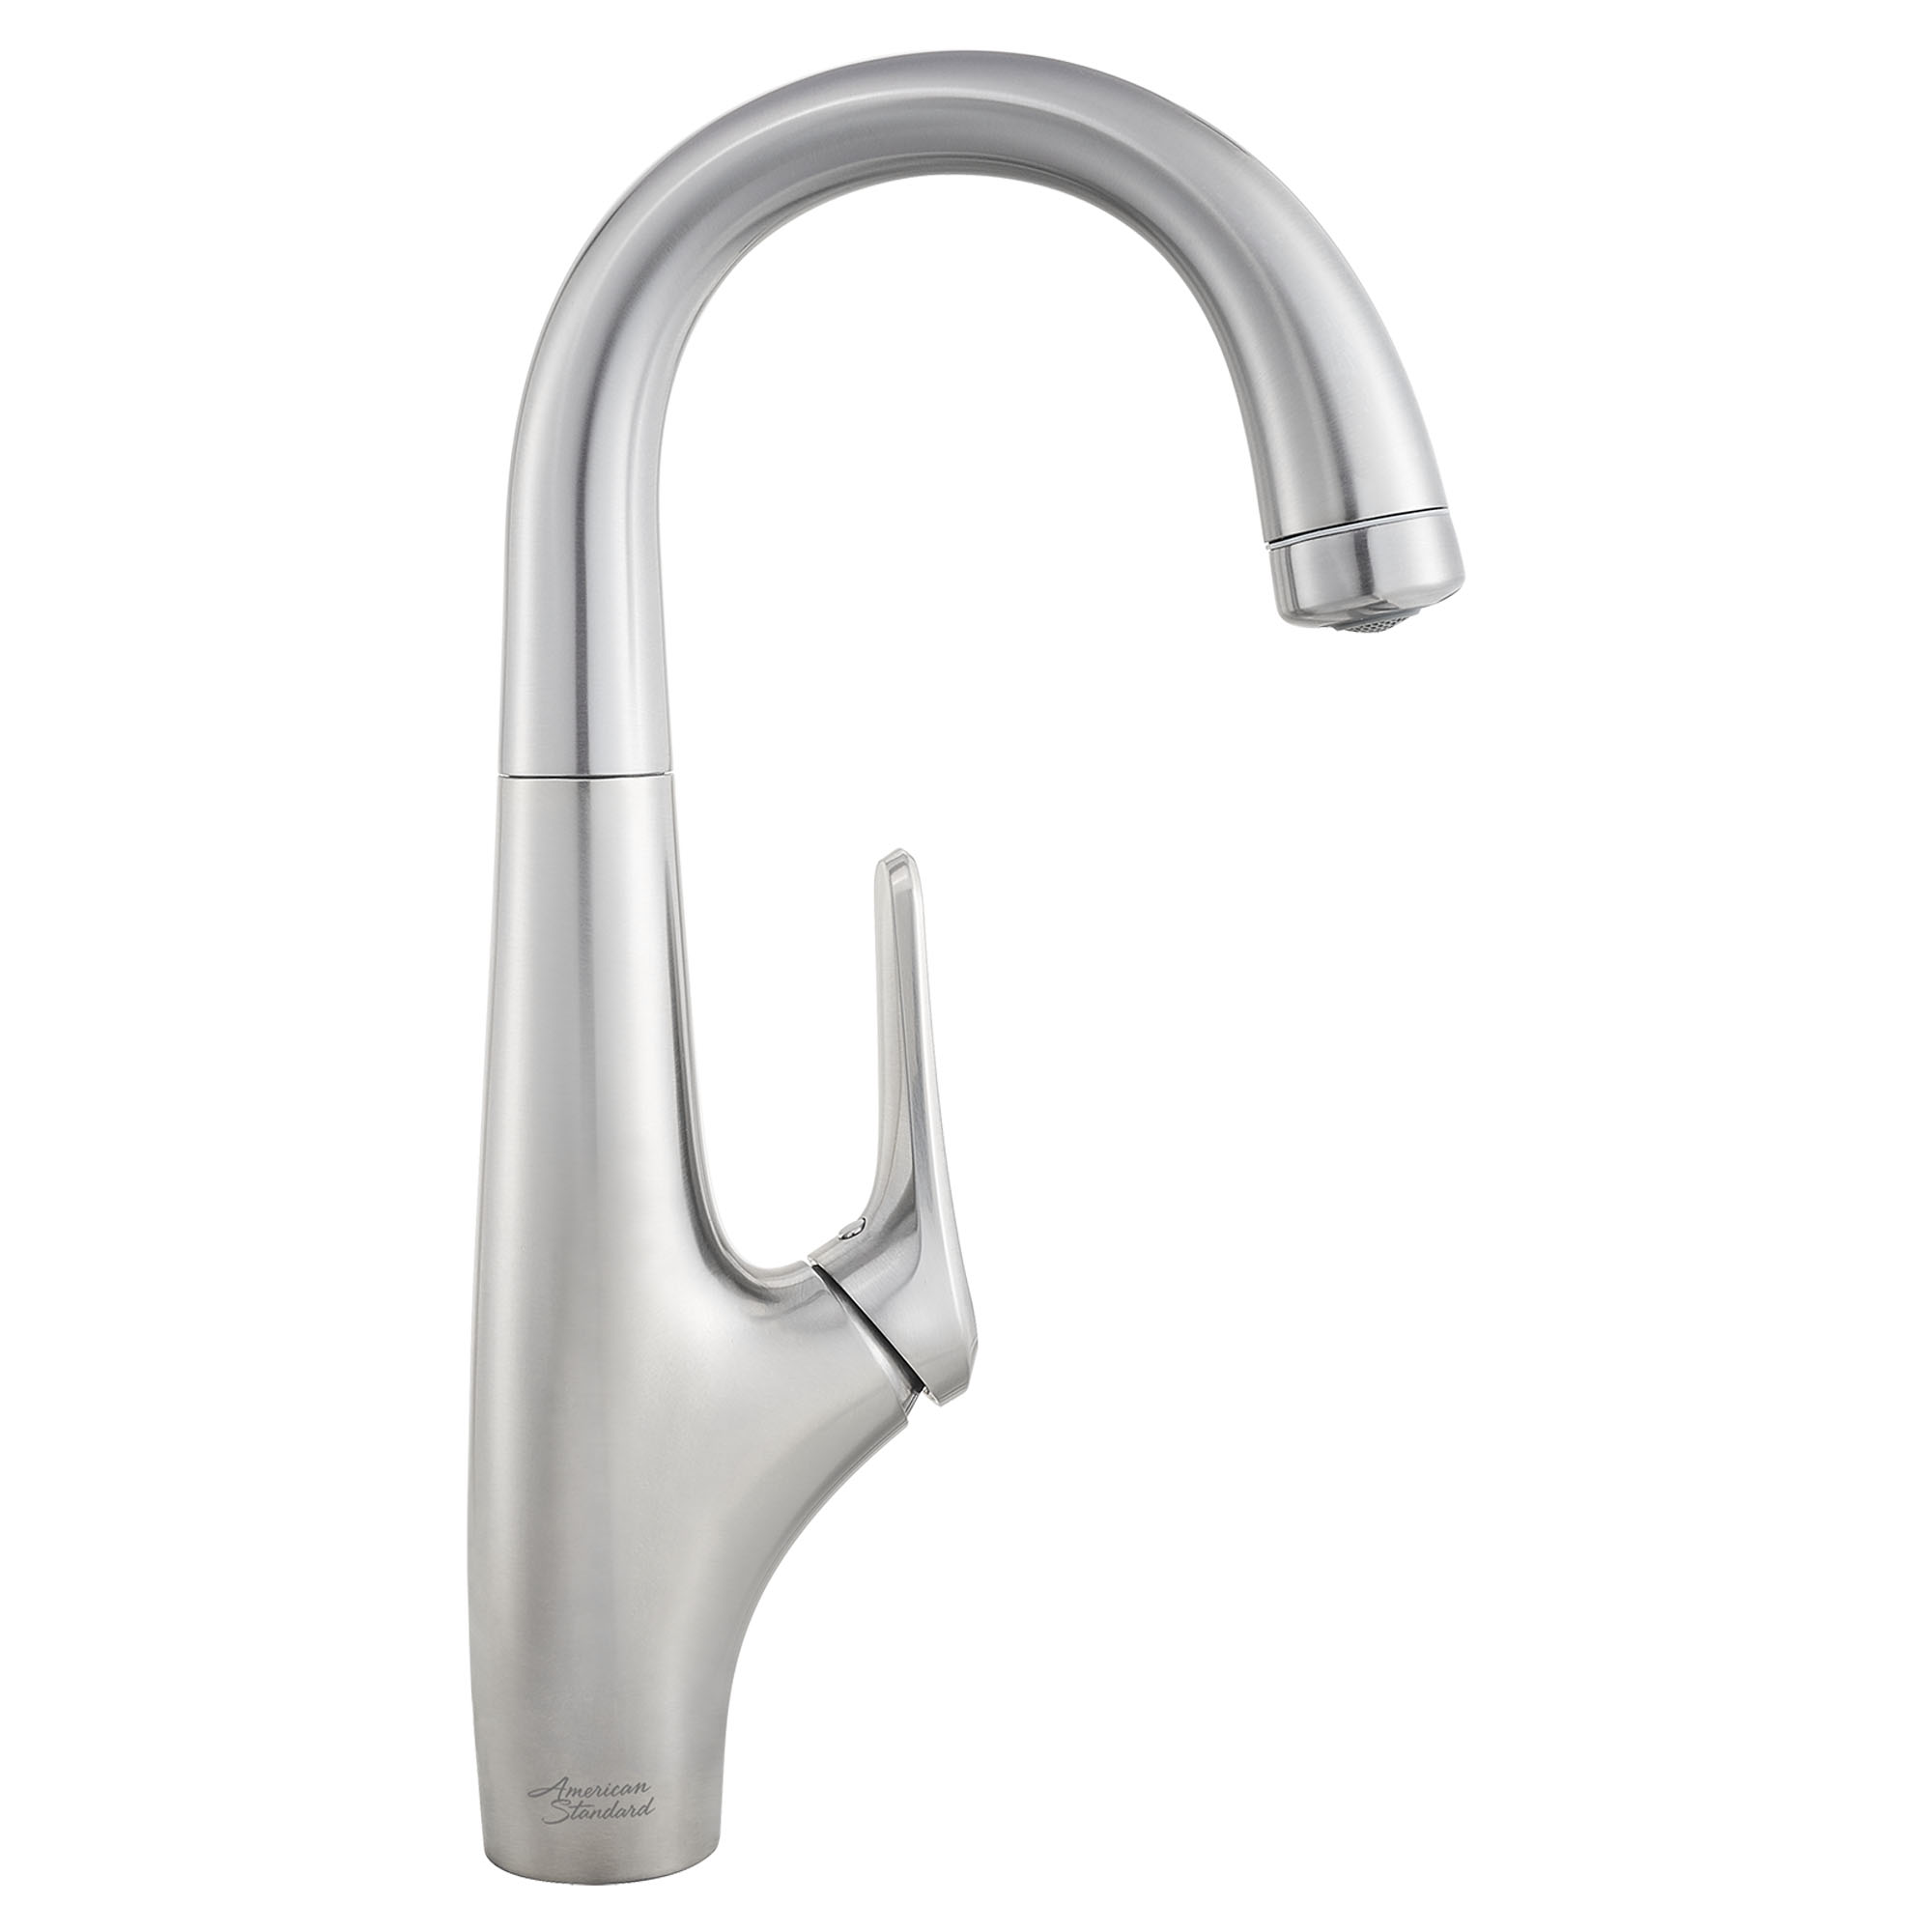 Avery™ Single-Handle Pull-Down Single Spray Kitchen Faucet 1.5 gpm/5.7 L/min